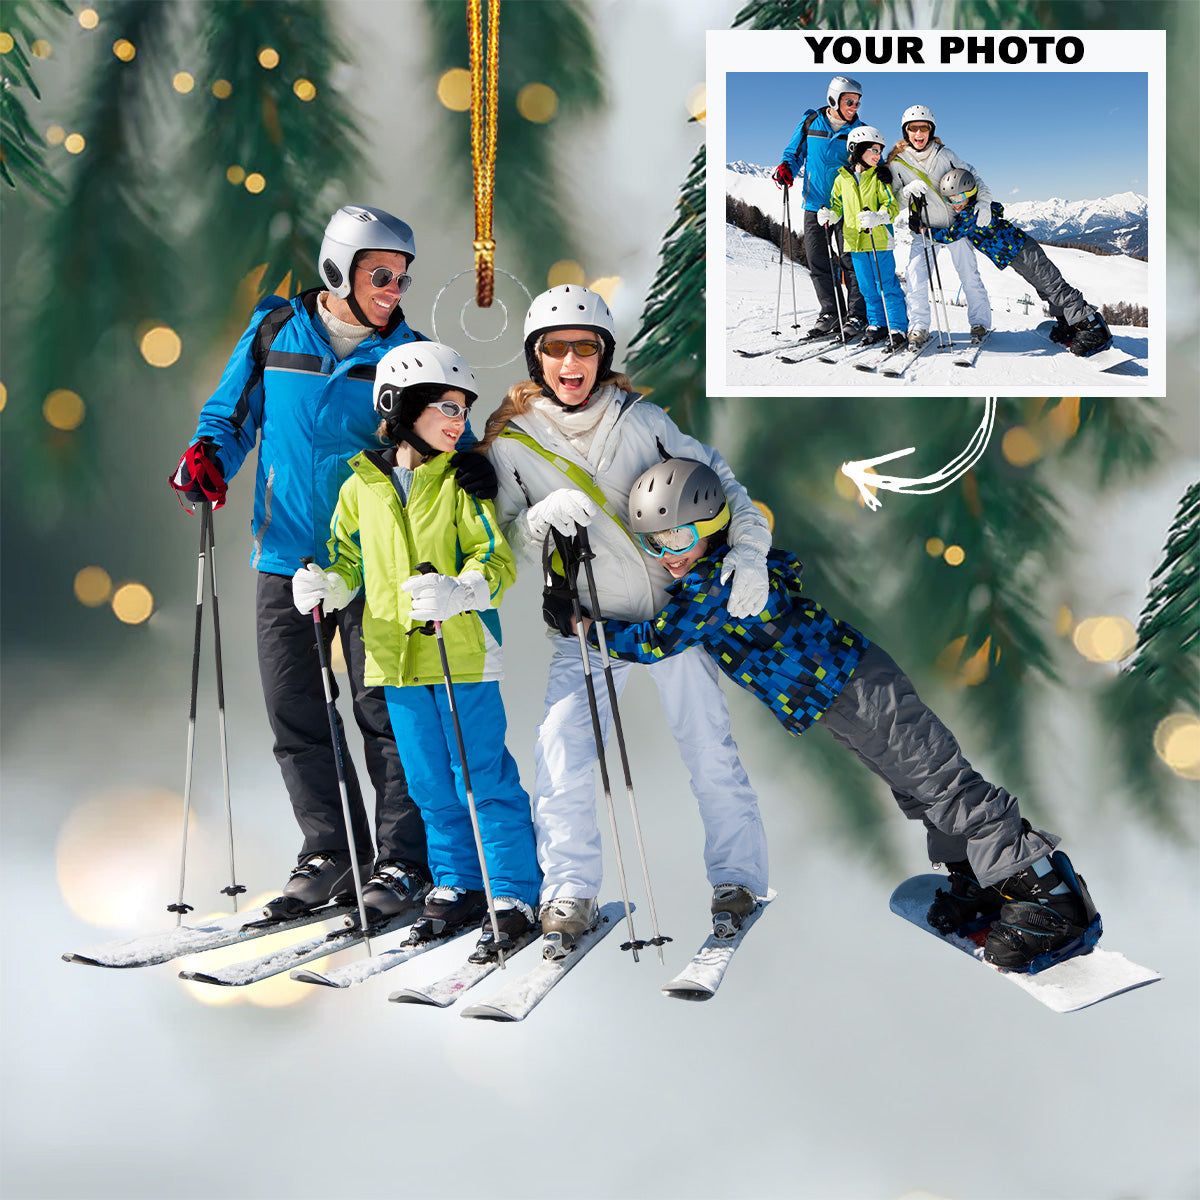 Personalized Photo Mica Ornament - Christmas Gift For Family Member, Friends -  Customized Your Photo Ornament Family Skiing Together